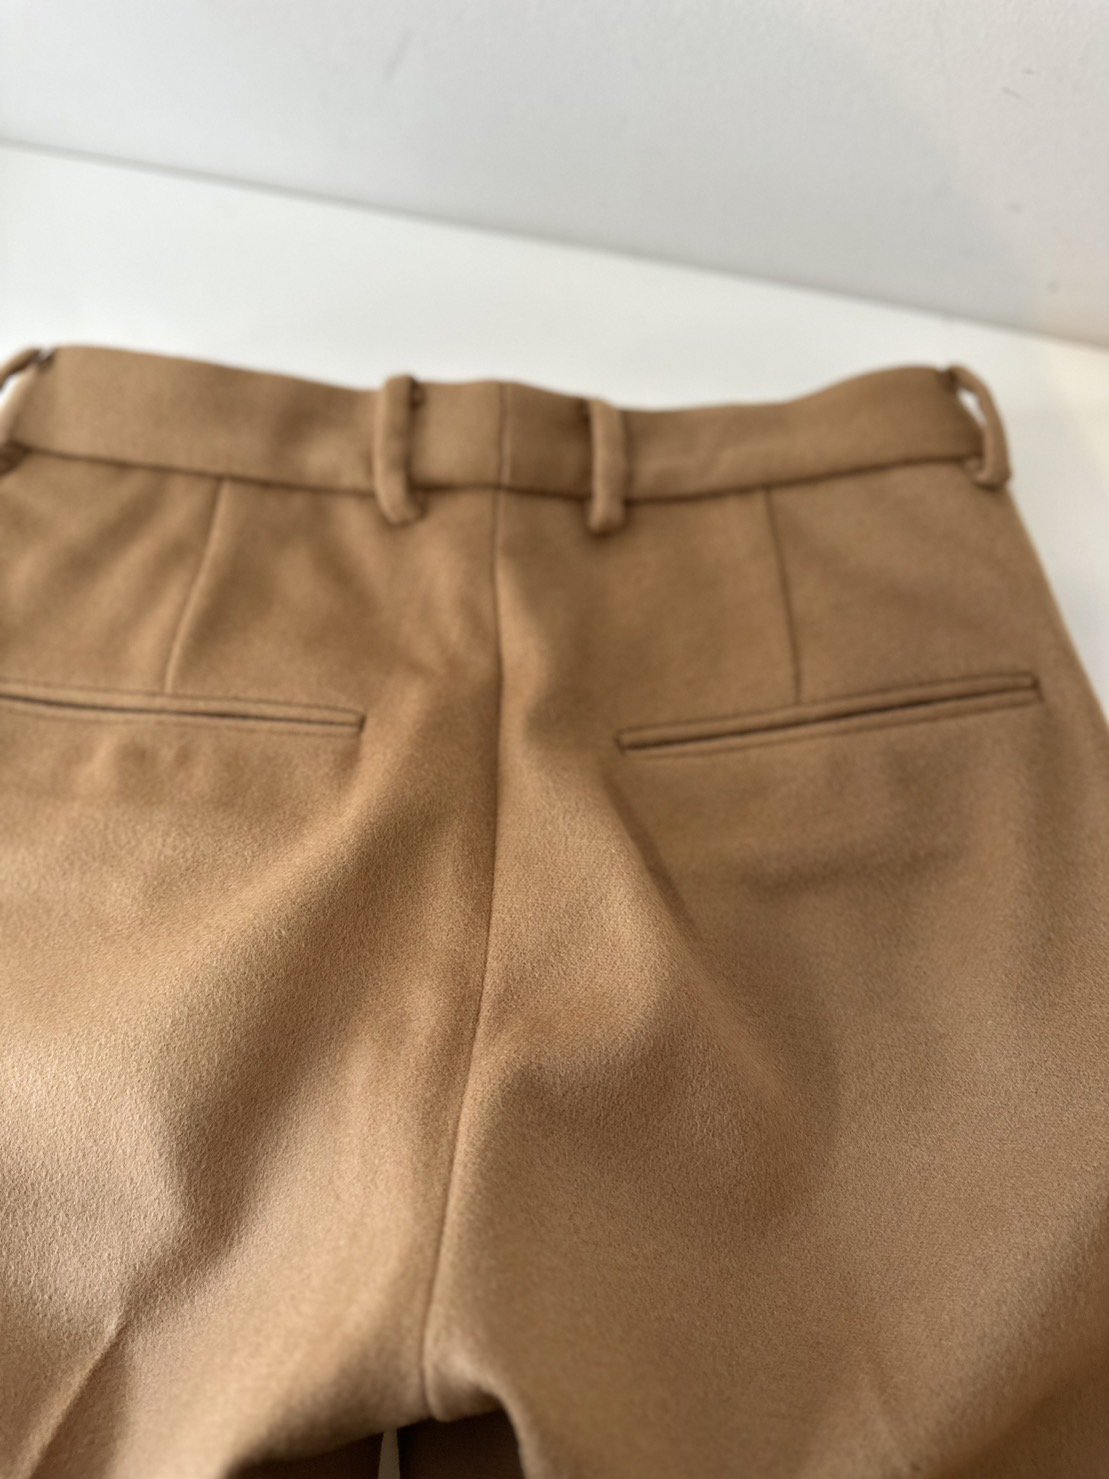 ALLEGE<br />Wool Semi Flare Slacks / Camel<img class='new_mark_img2' src='https://img.shop-pro.jp/img/new/icons14.gif' style='border:none;display:inline;margin:0px;padding:0px;width:auto;' />